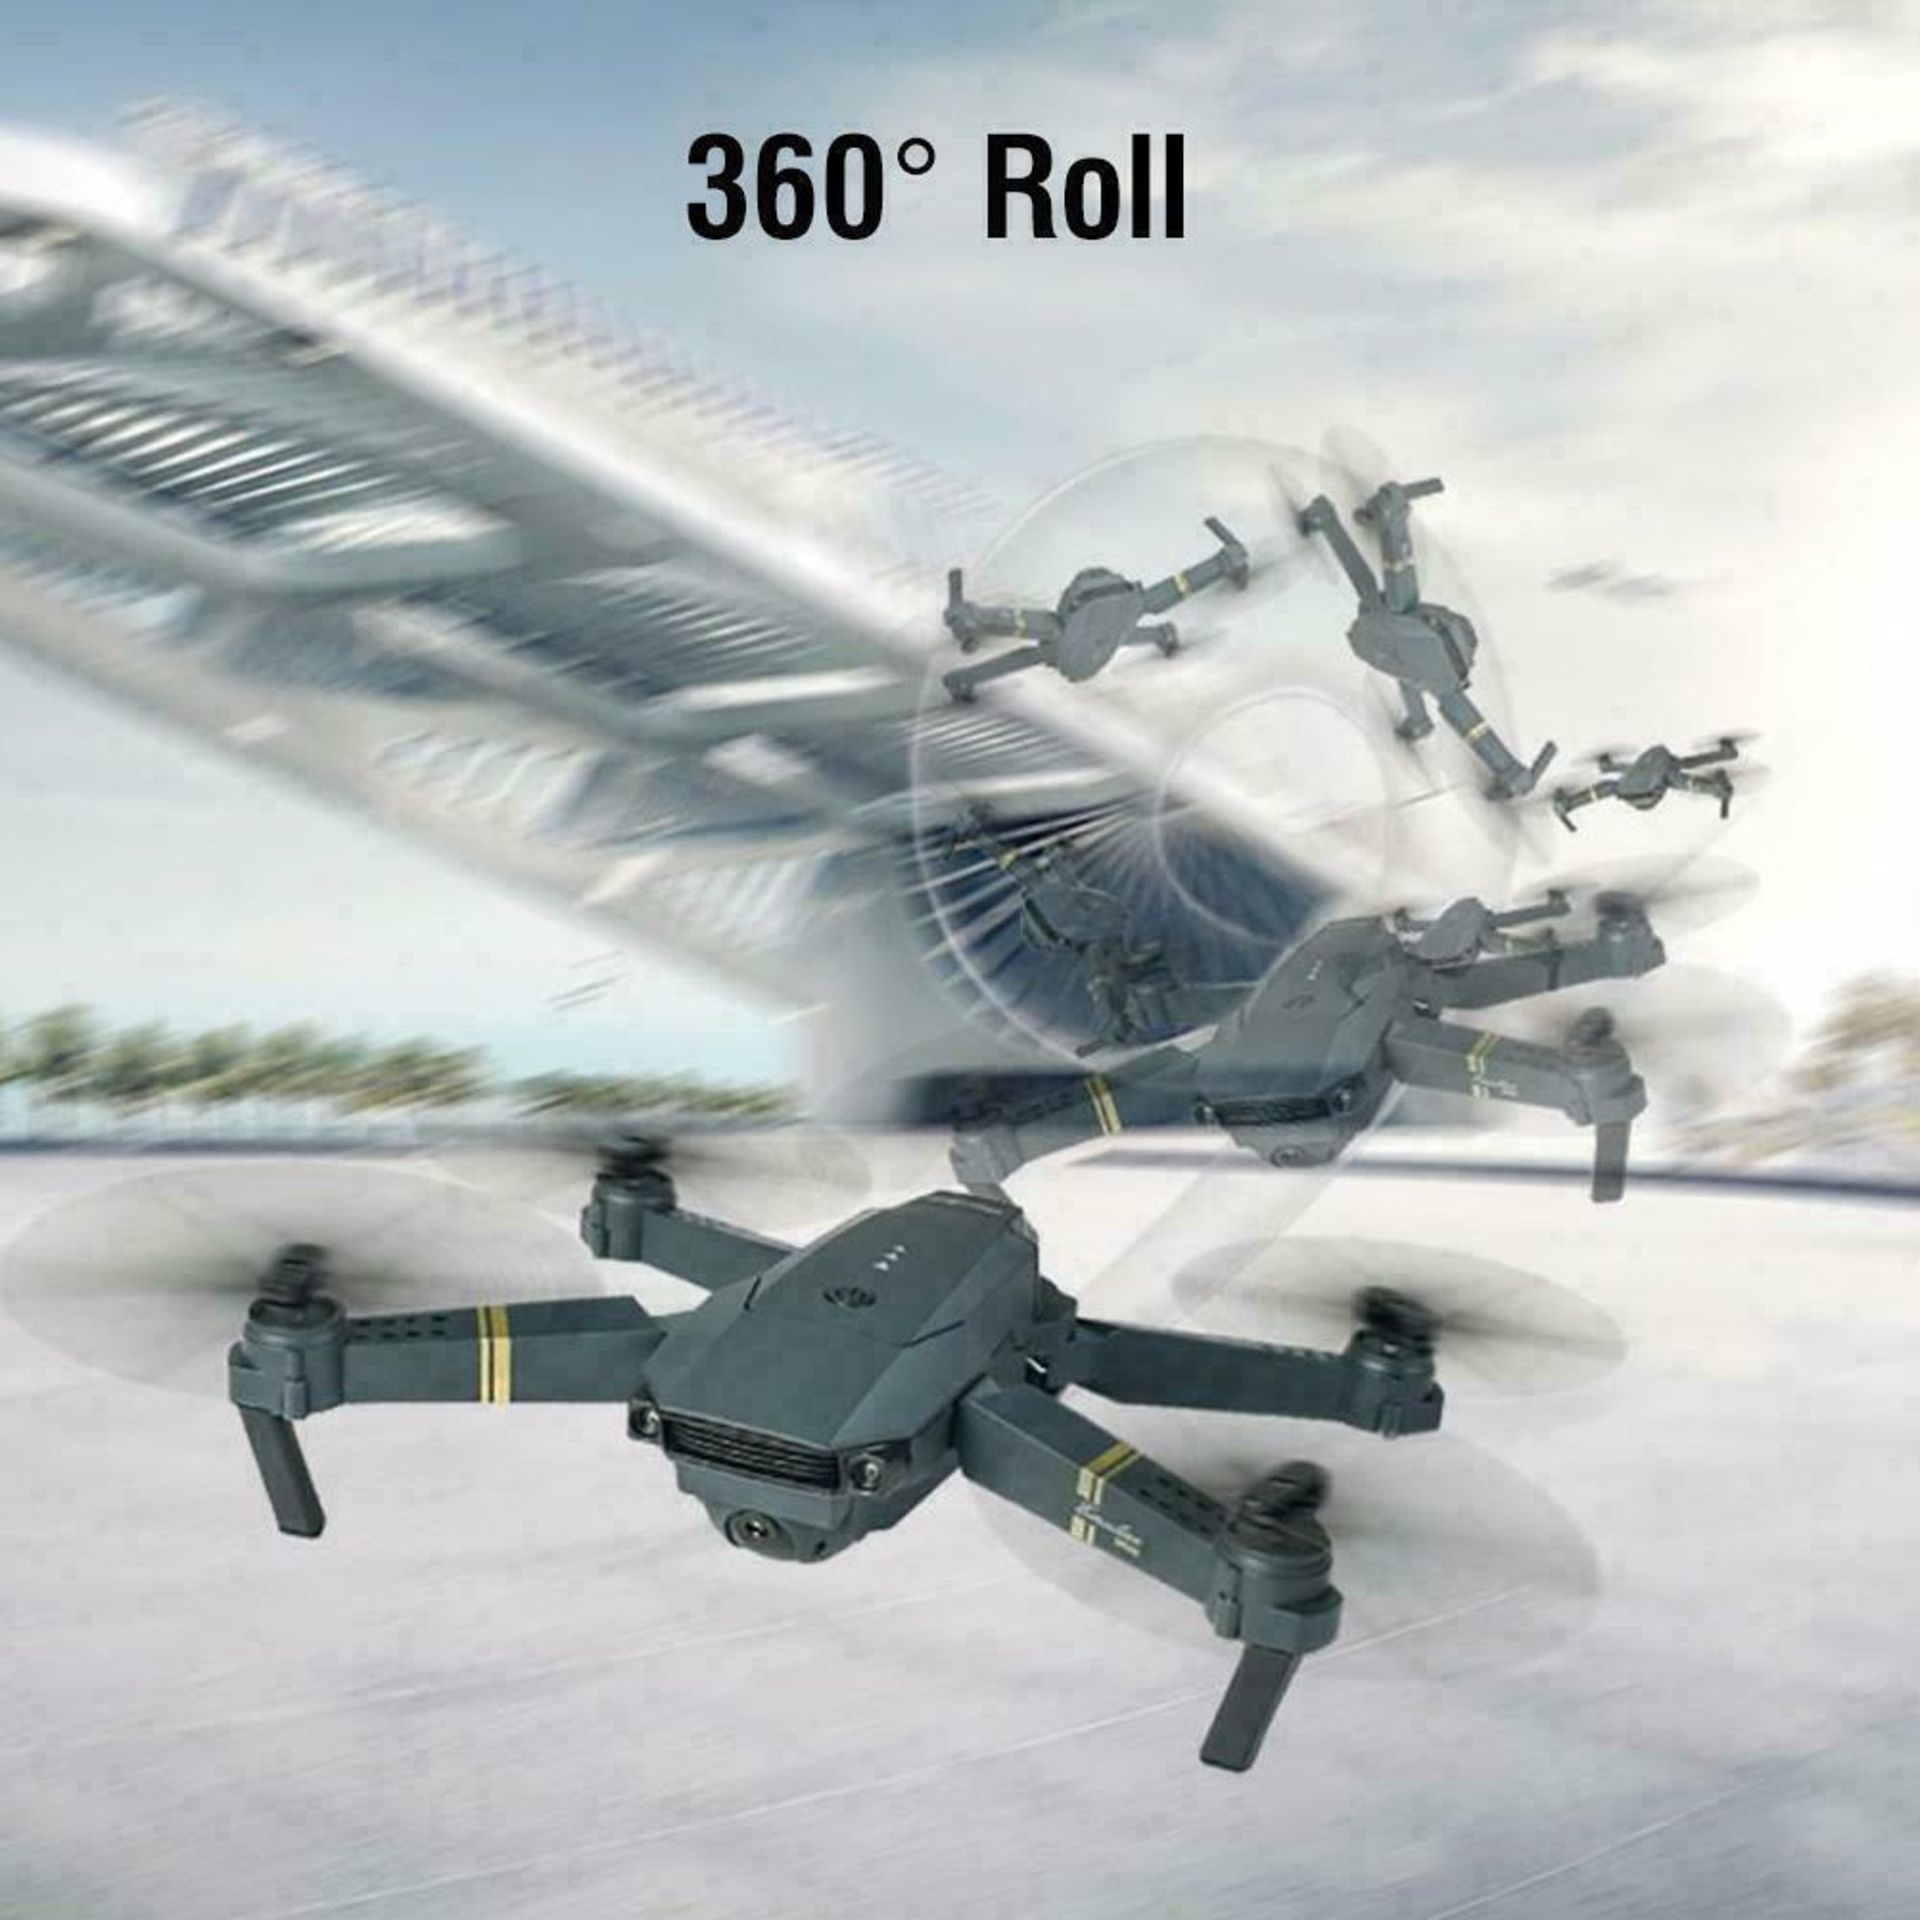 DRONE X REMOTE CONTROL QUADCOPTER 1080P HD CAMERA - THE LATEST TECH ONLY 7 OF THESE LEFT! - Image 9 of 9